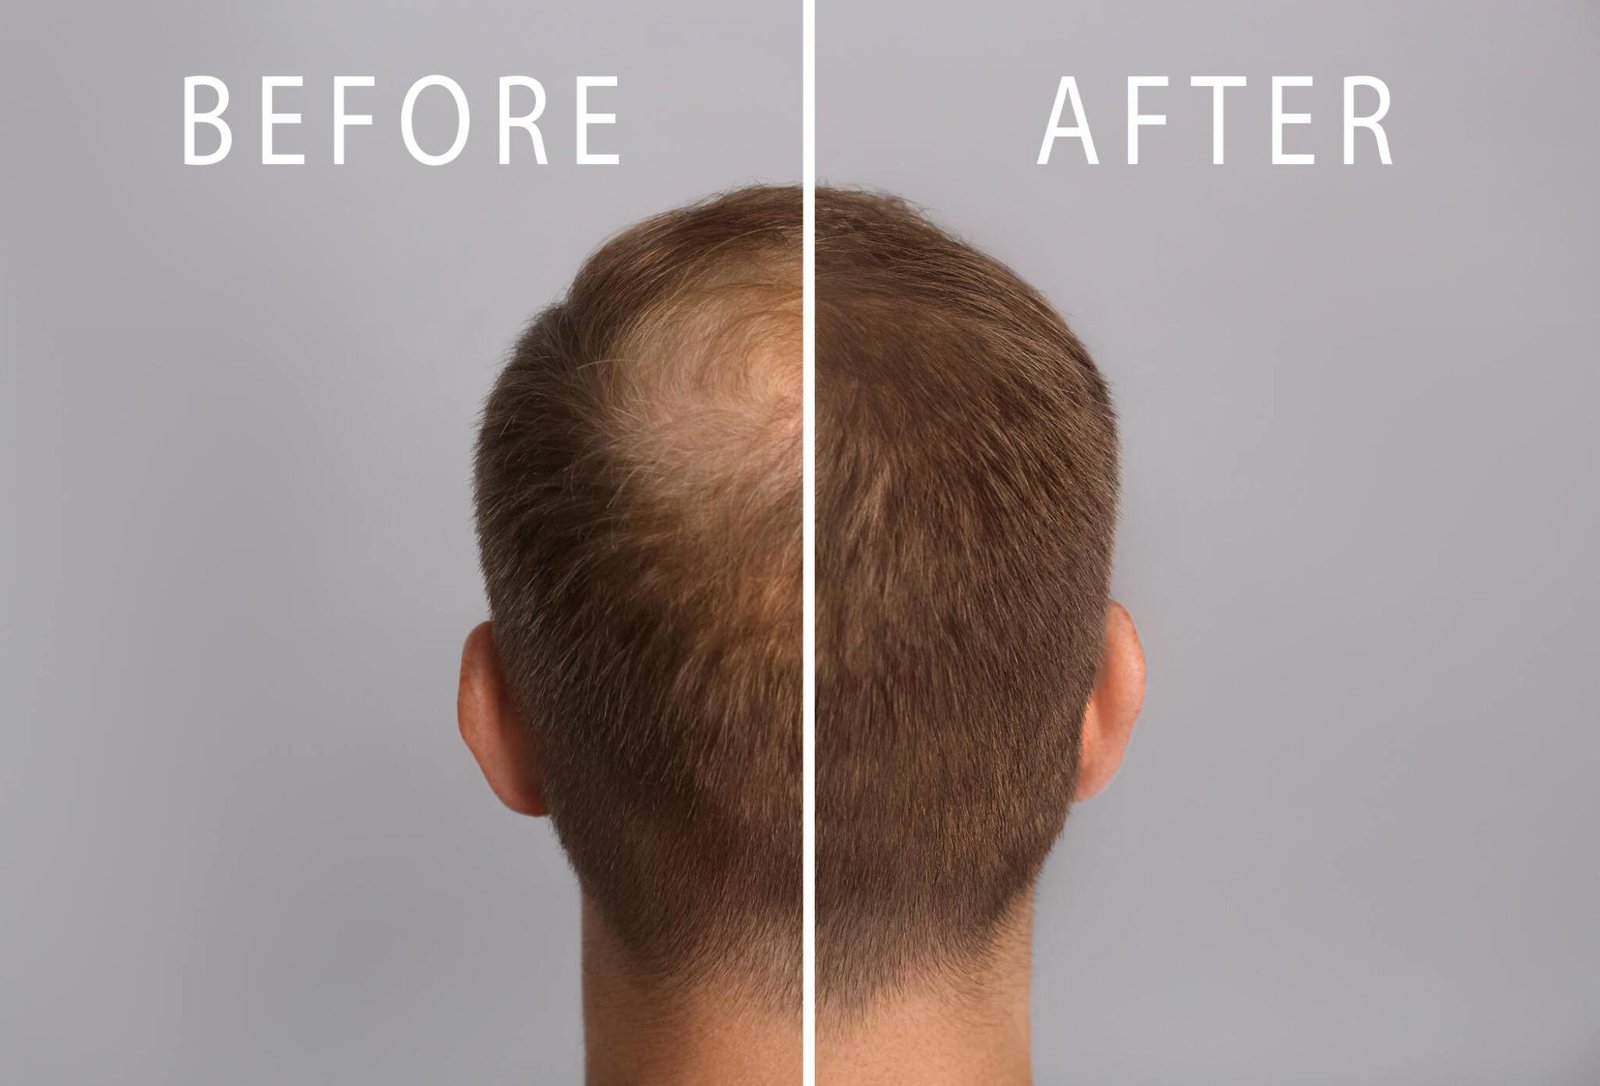 Man with hair loss problem before and after